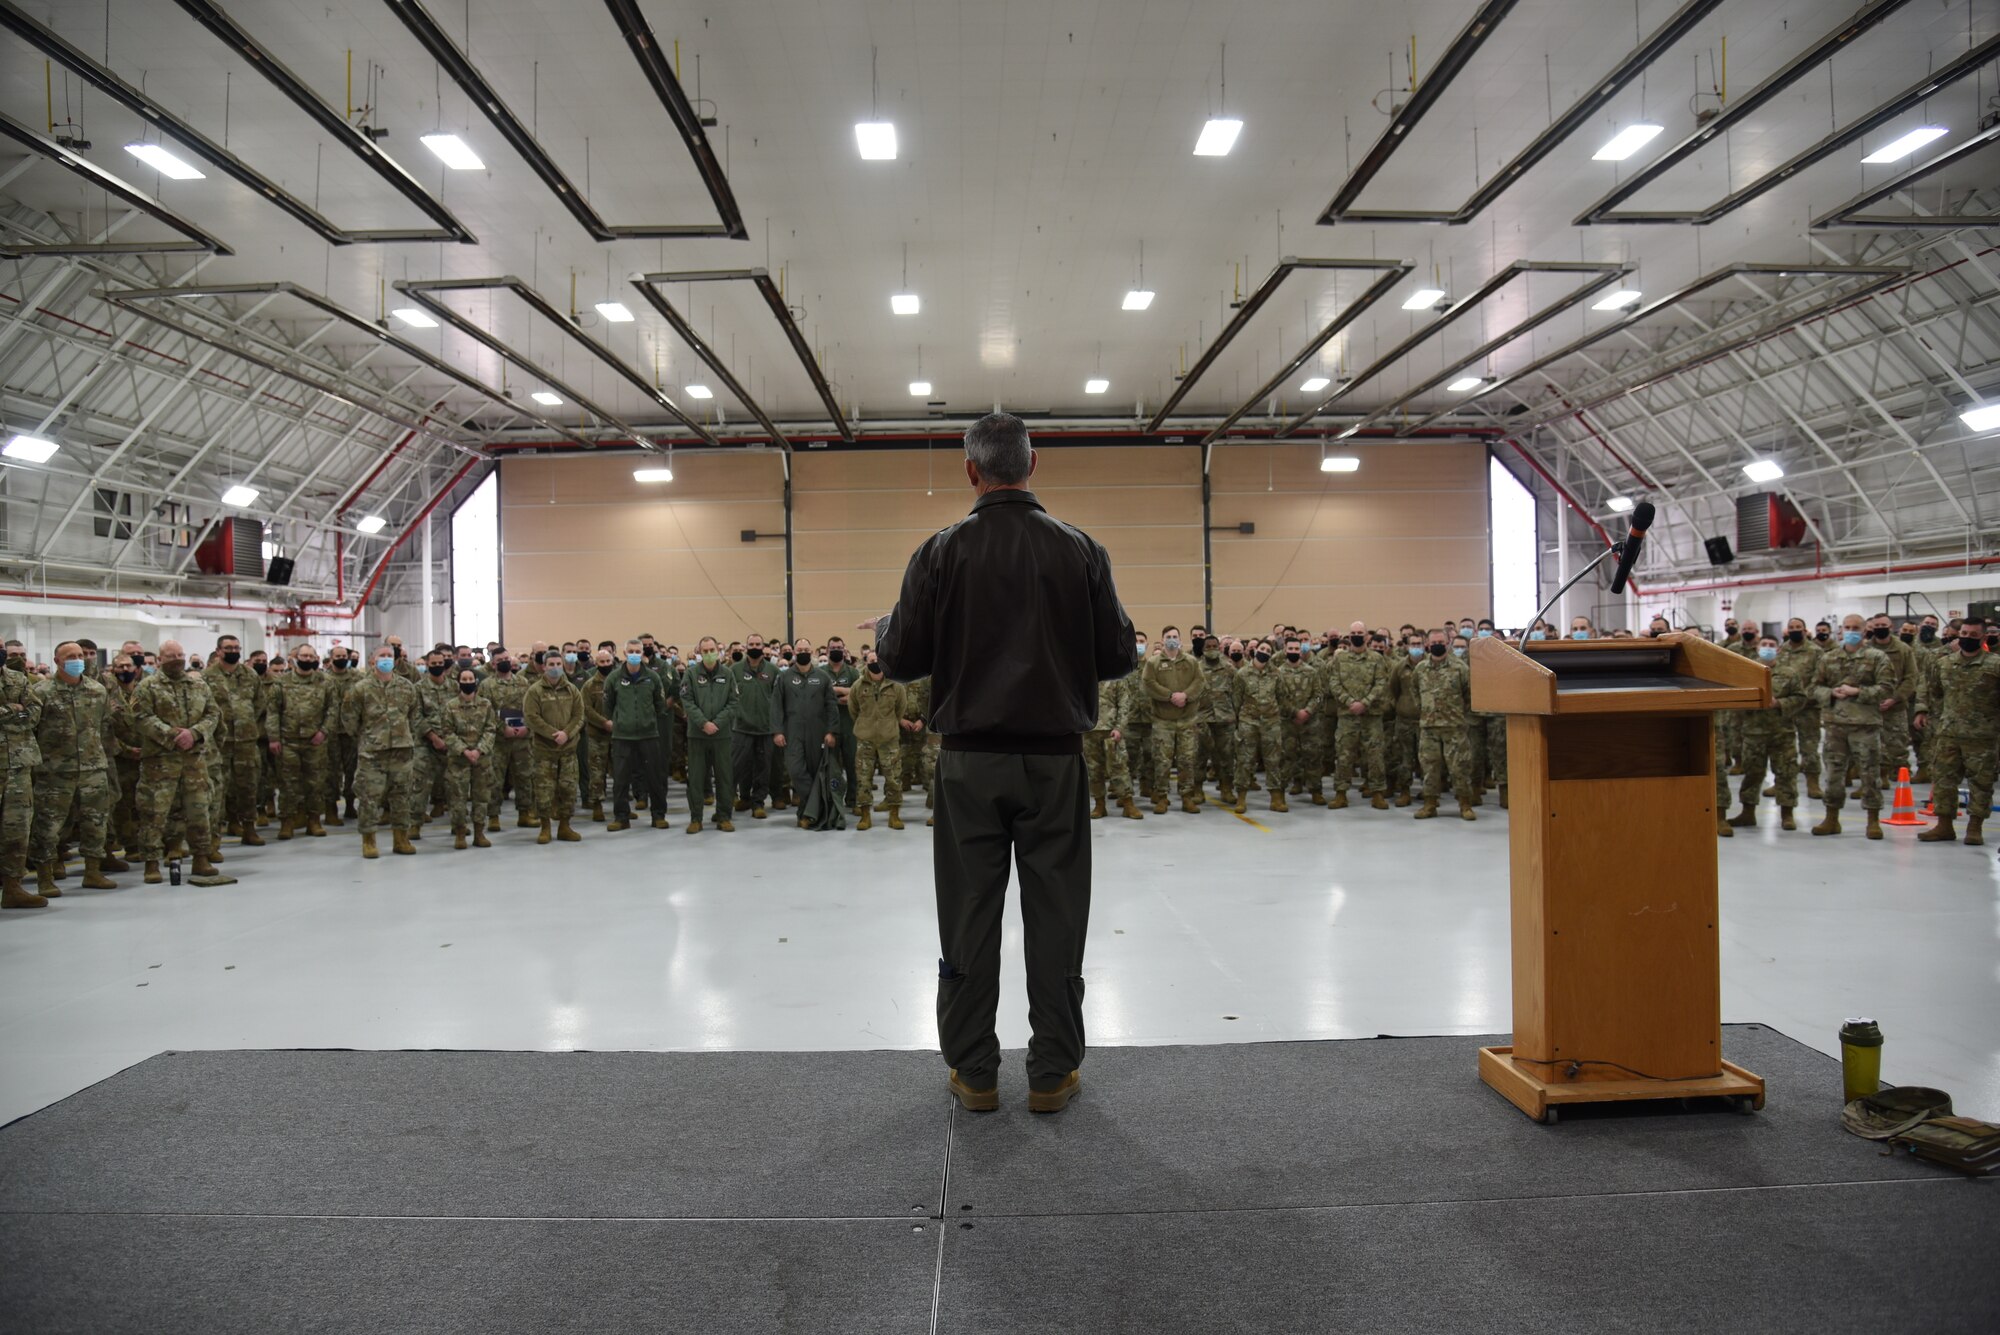 Col. William McCrink III, speaks to Airmen assigned to the New York Air National Guard's 174th Attack Wing during a Wing "All Call" on December 5, 2021 at Hancock Field Air National Guard Base in Syracuse ,New York as he announces that the wing has received the Air Force Outstanding Unit Award. The award was for the period period of Jan.1, 2020 through Dec. 31, 2020.